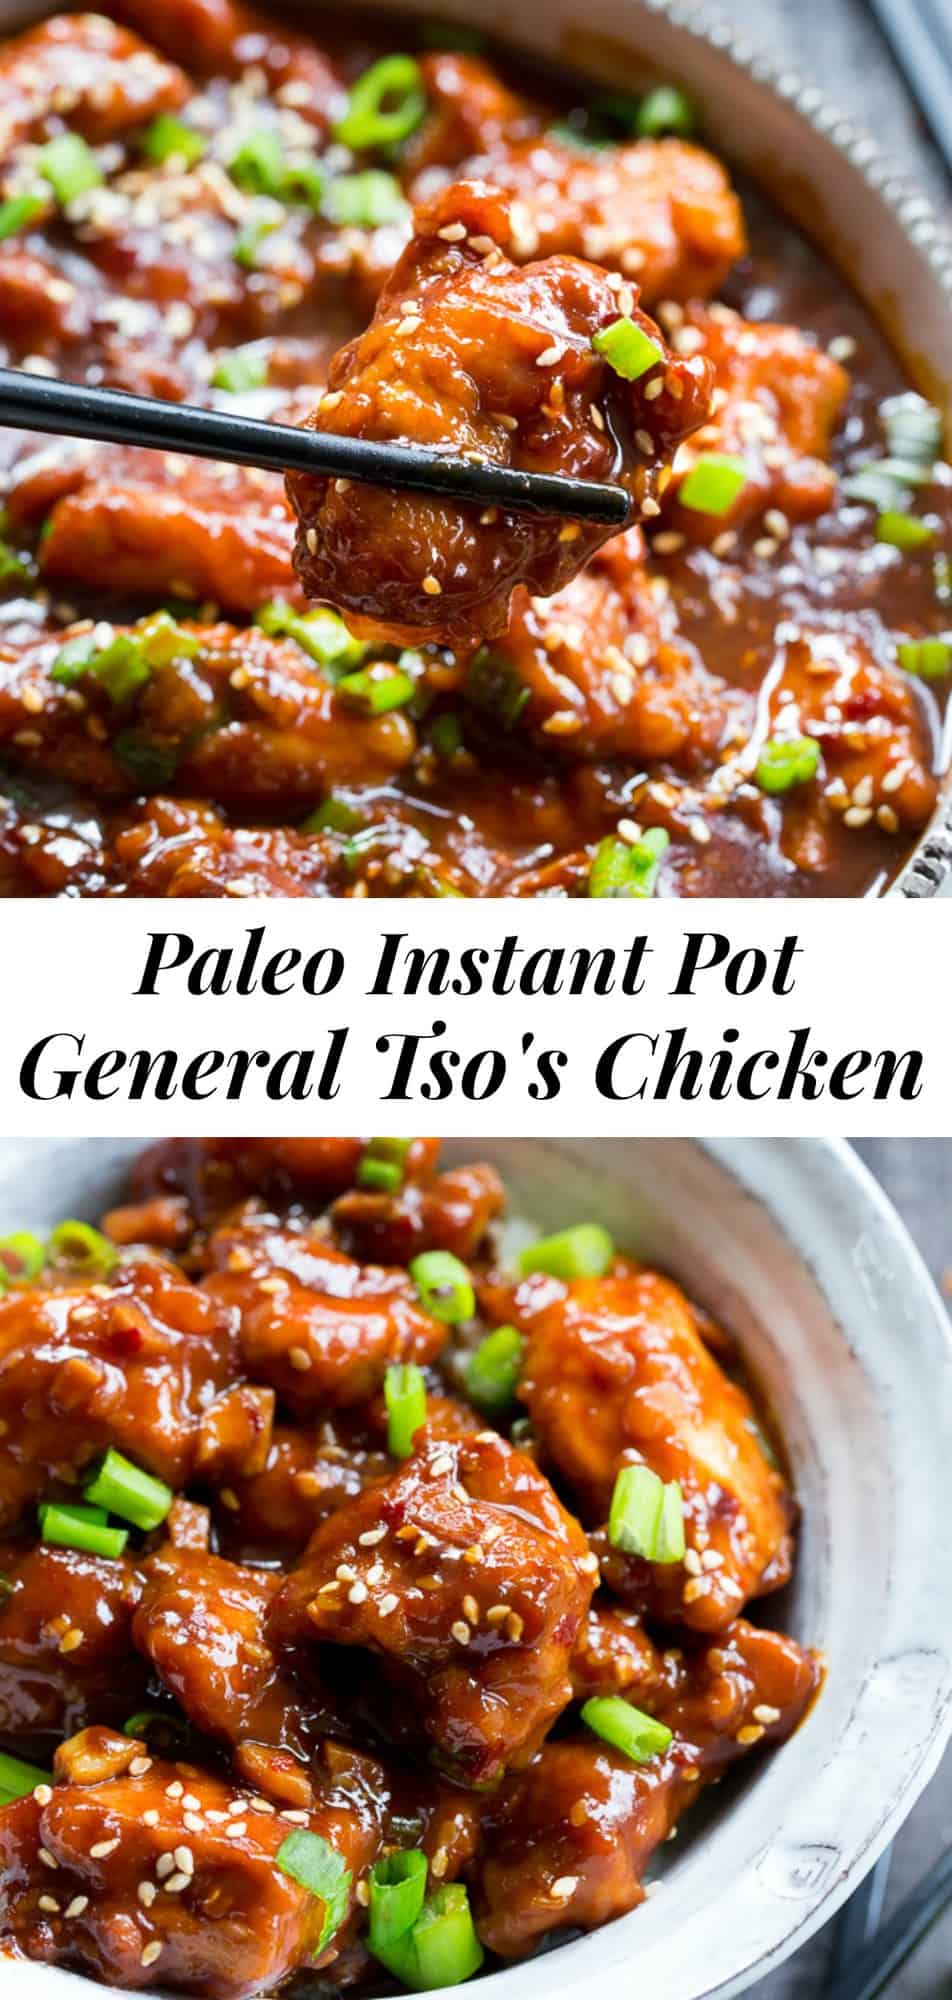 General Tso's Chicken In the Instant Pot {Paleo} | The Paleo Running Momma